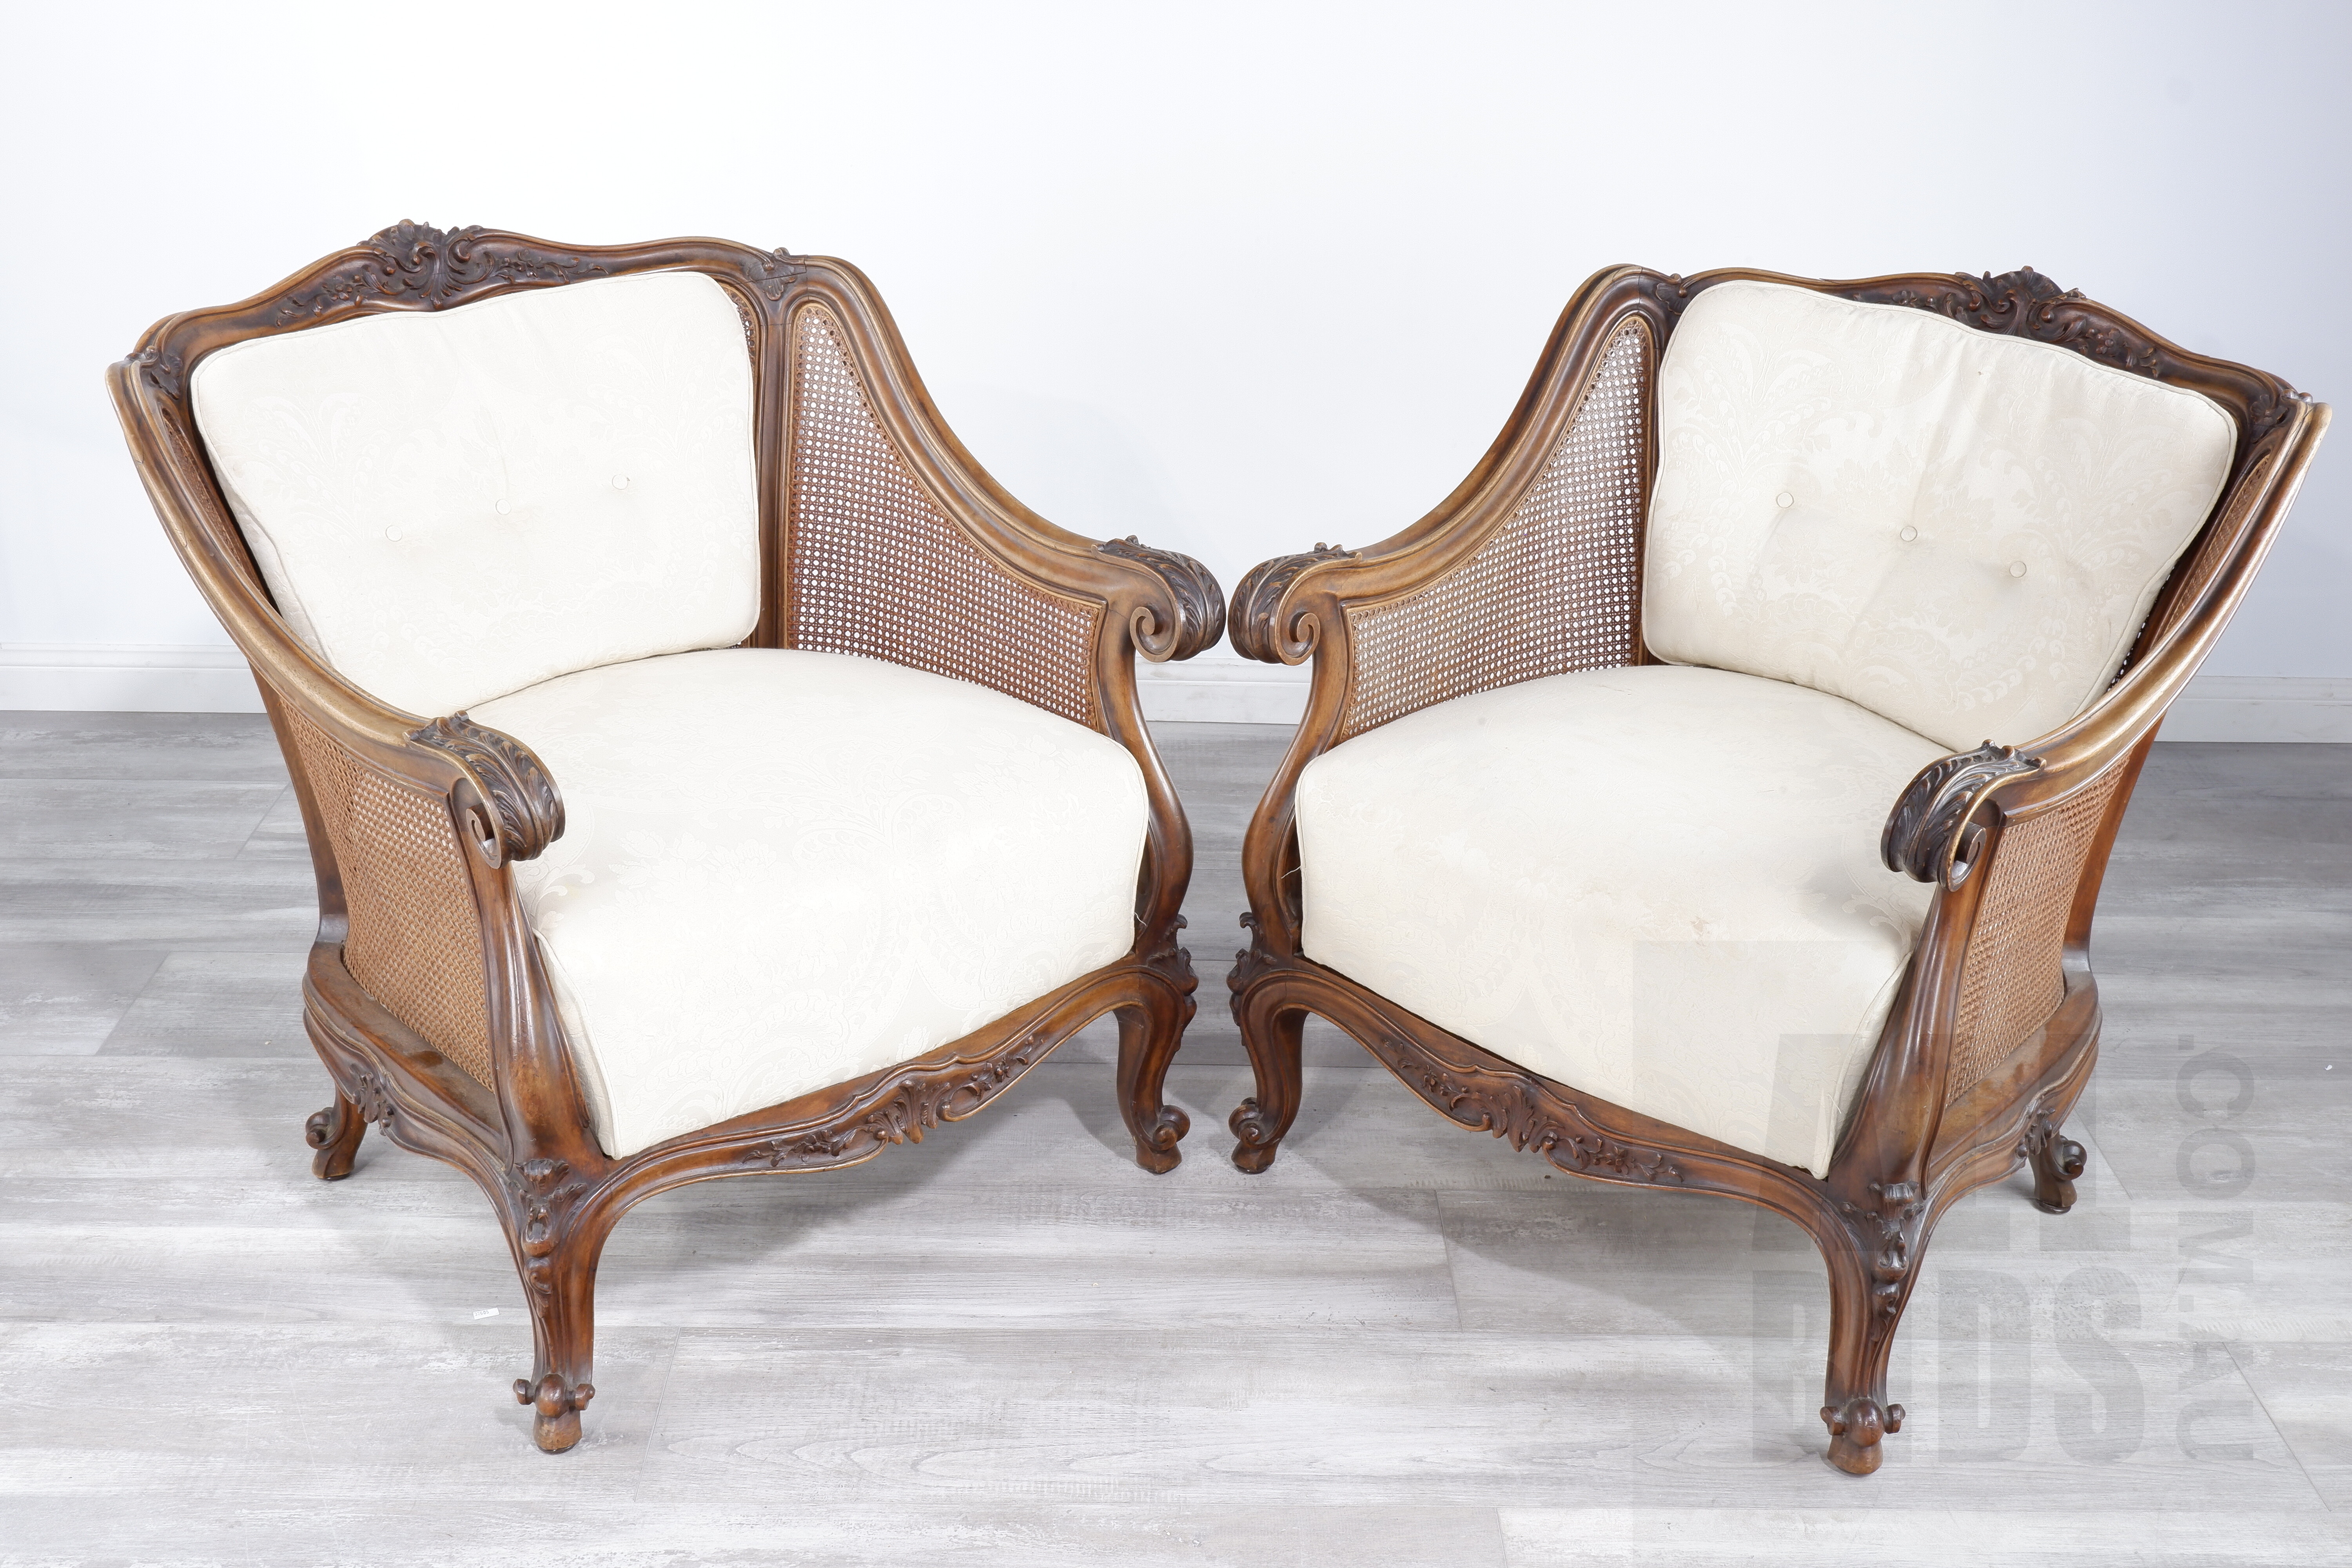 'Pair of Early 20th Century European Cane Armchairs with Buttoned Floral Brocade Upholstery'